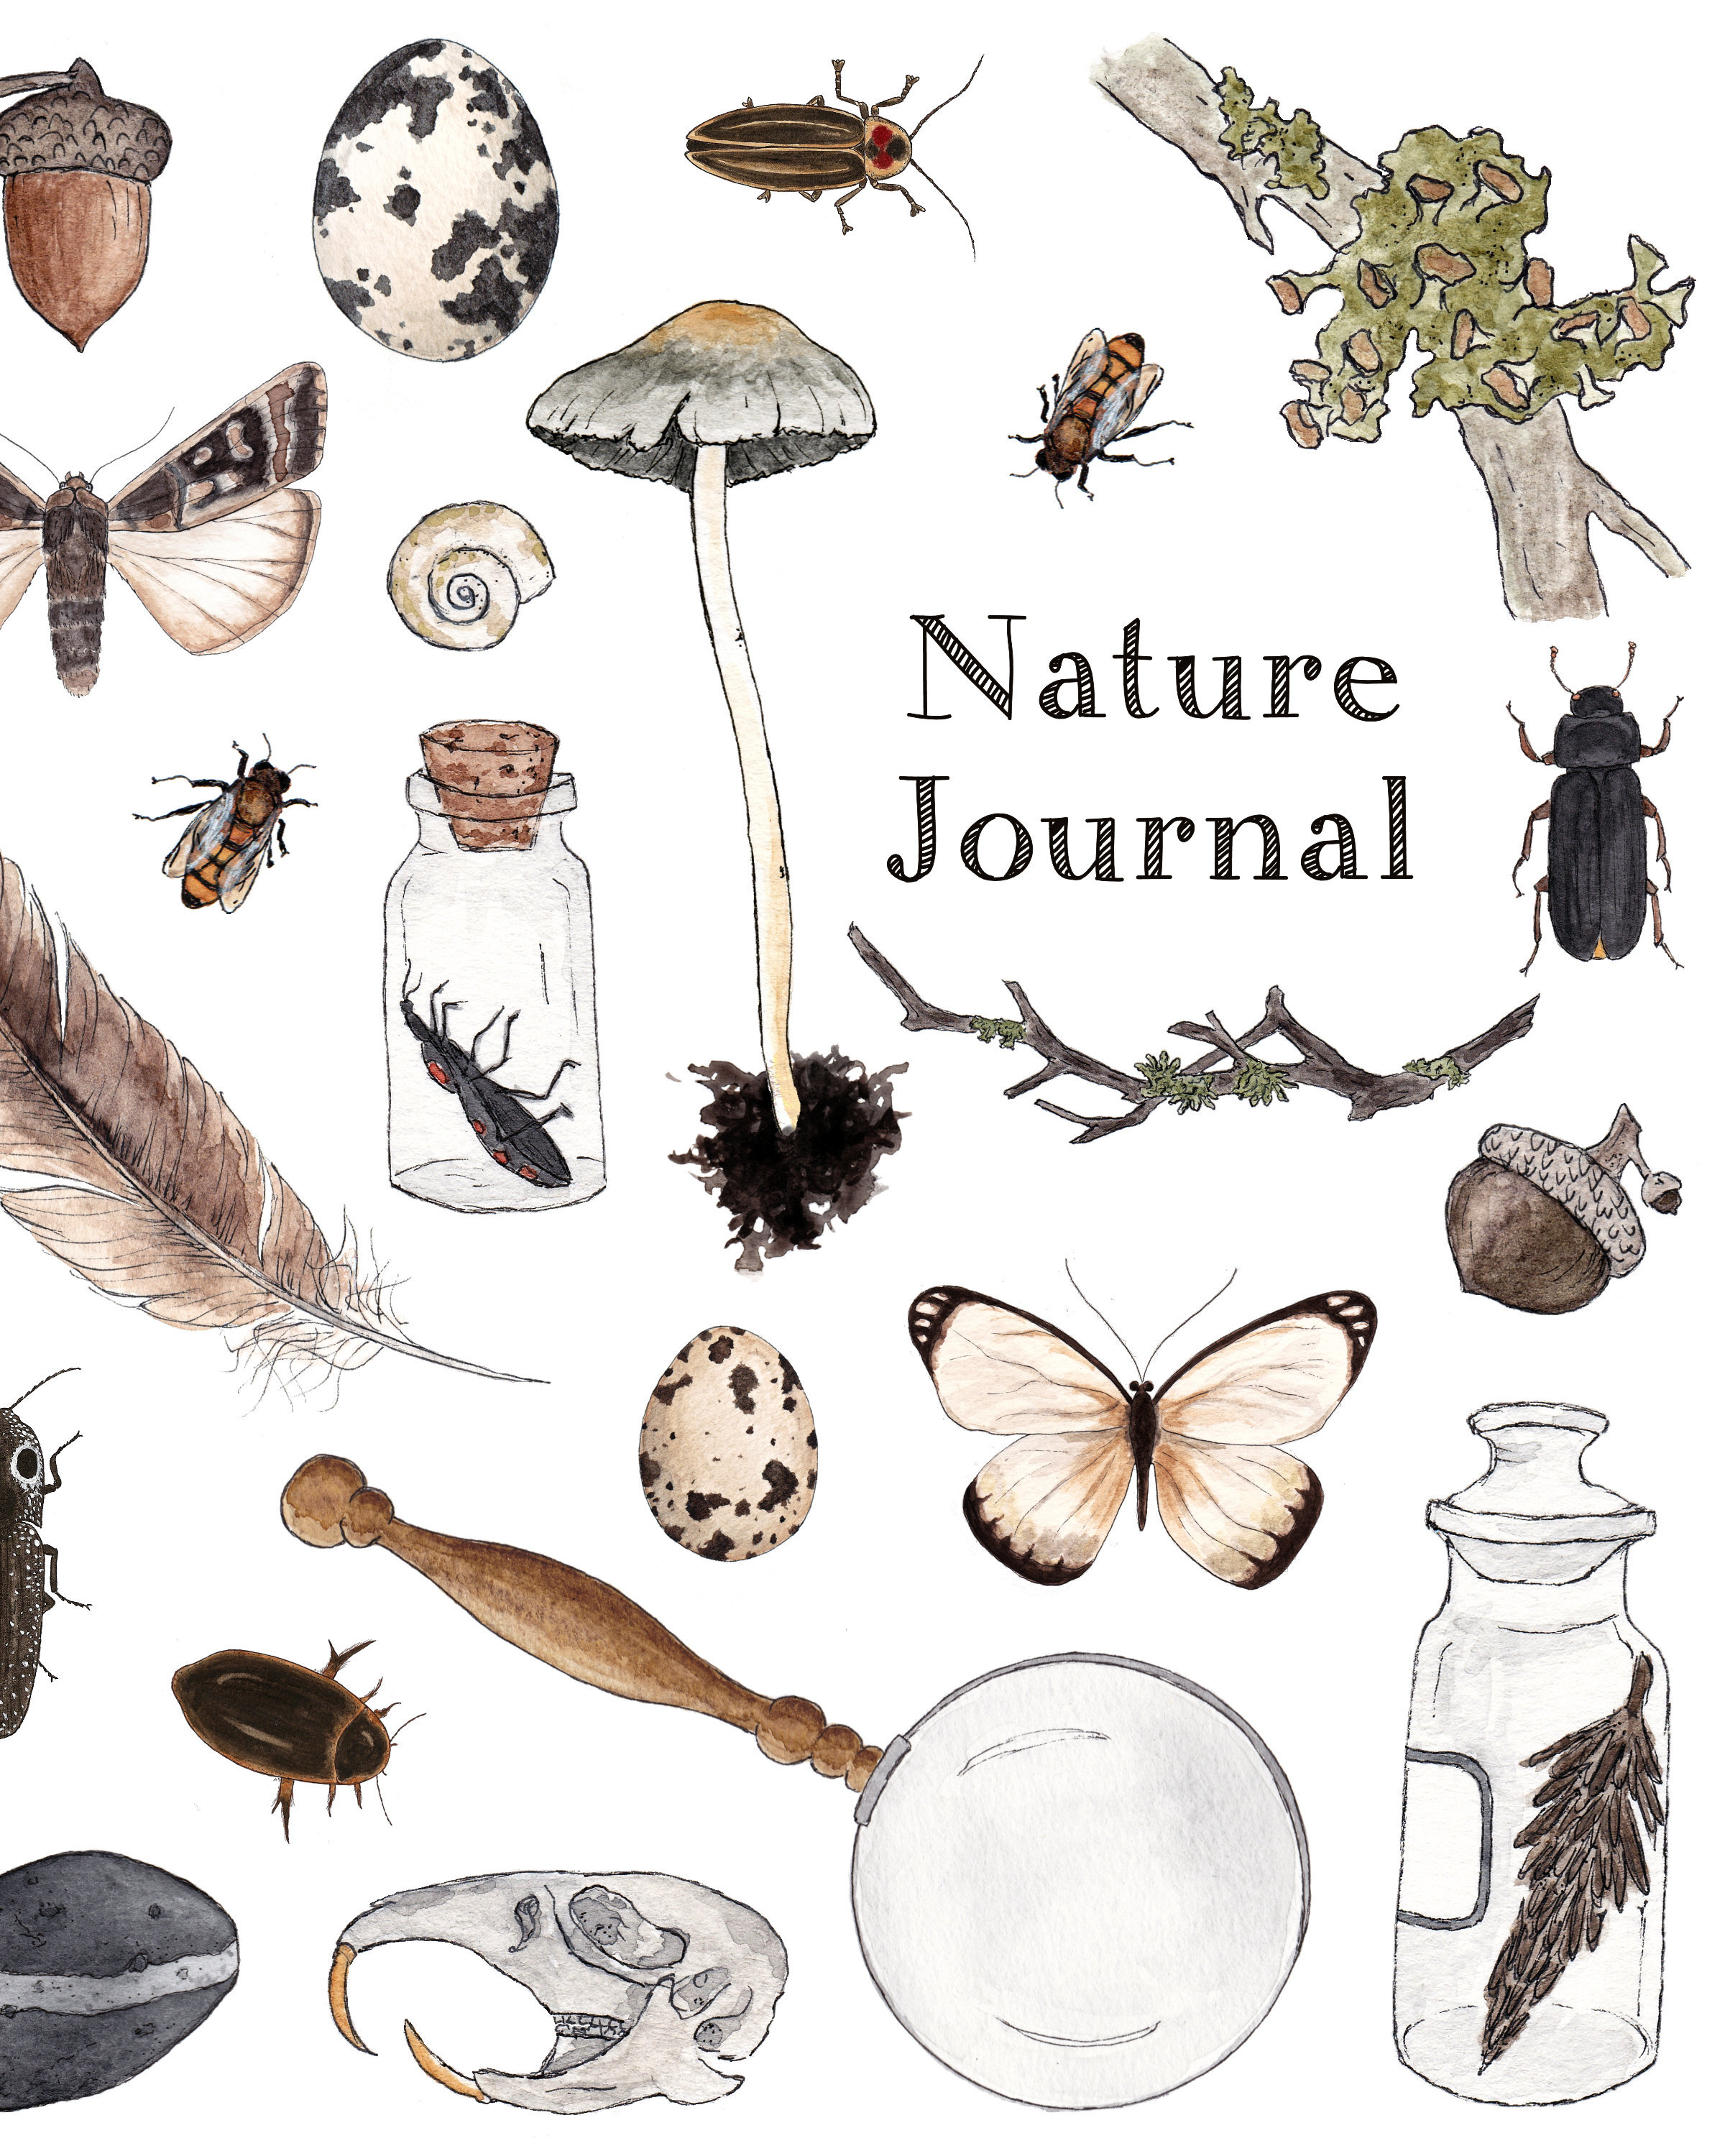 Nature Journal - Nature Collection Cover Art